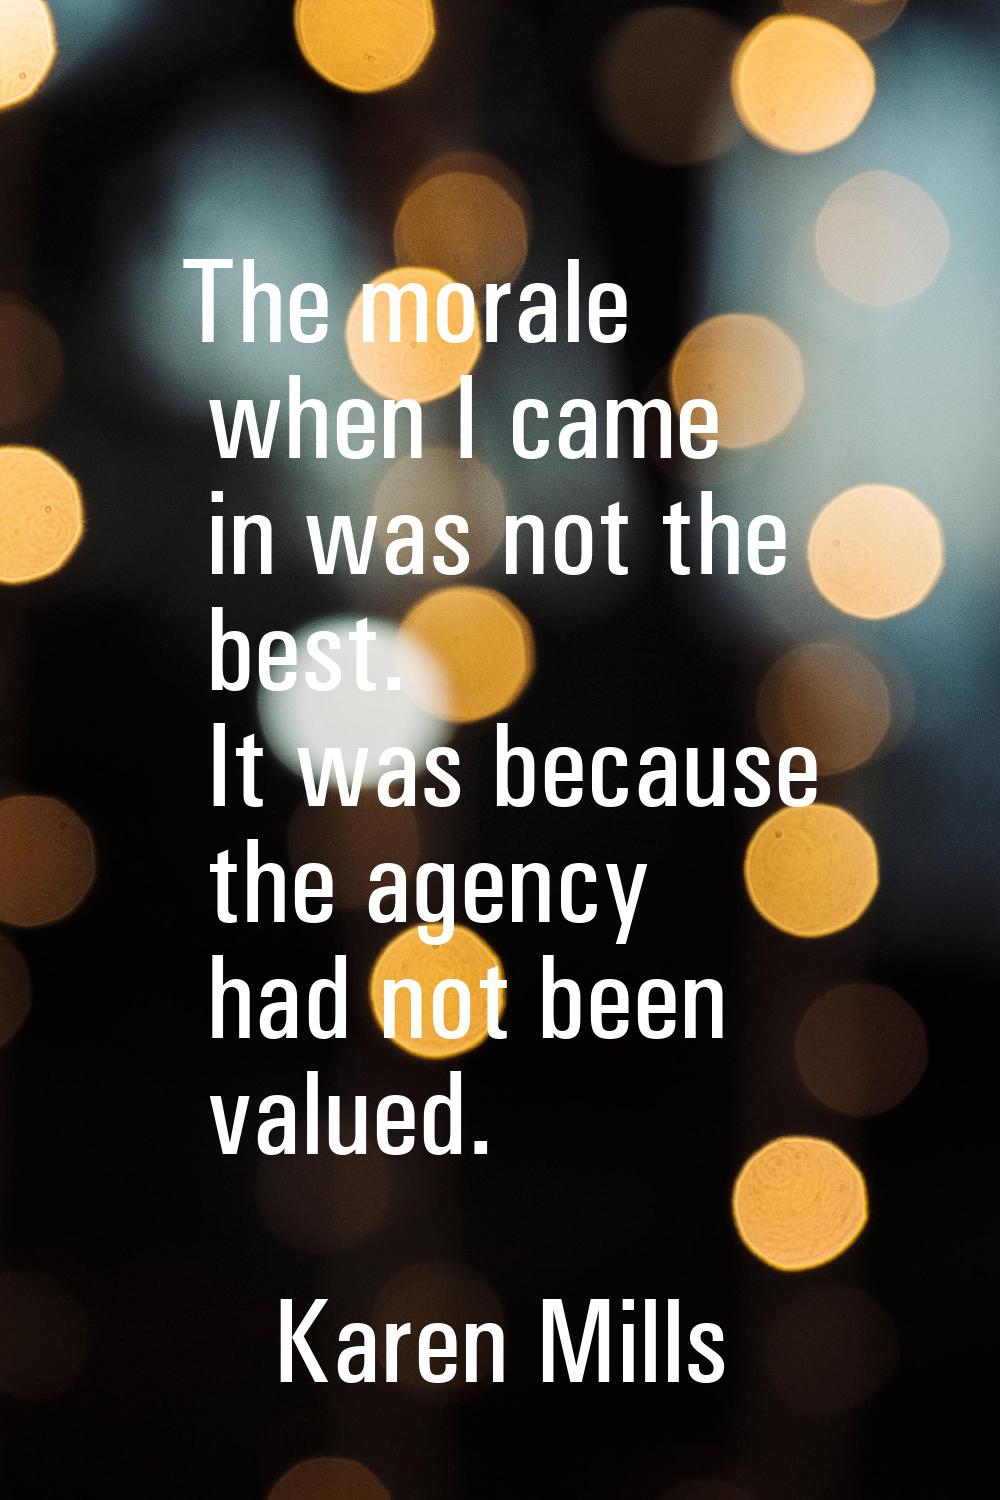 The morale when I came in was not the best. It was because the agency had not been valued.